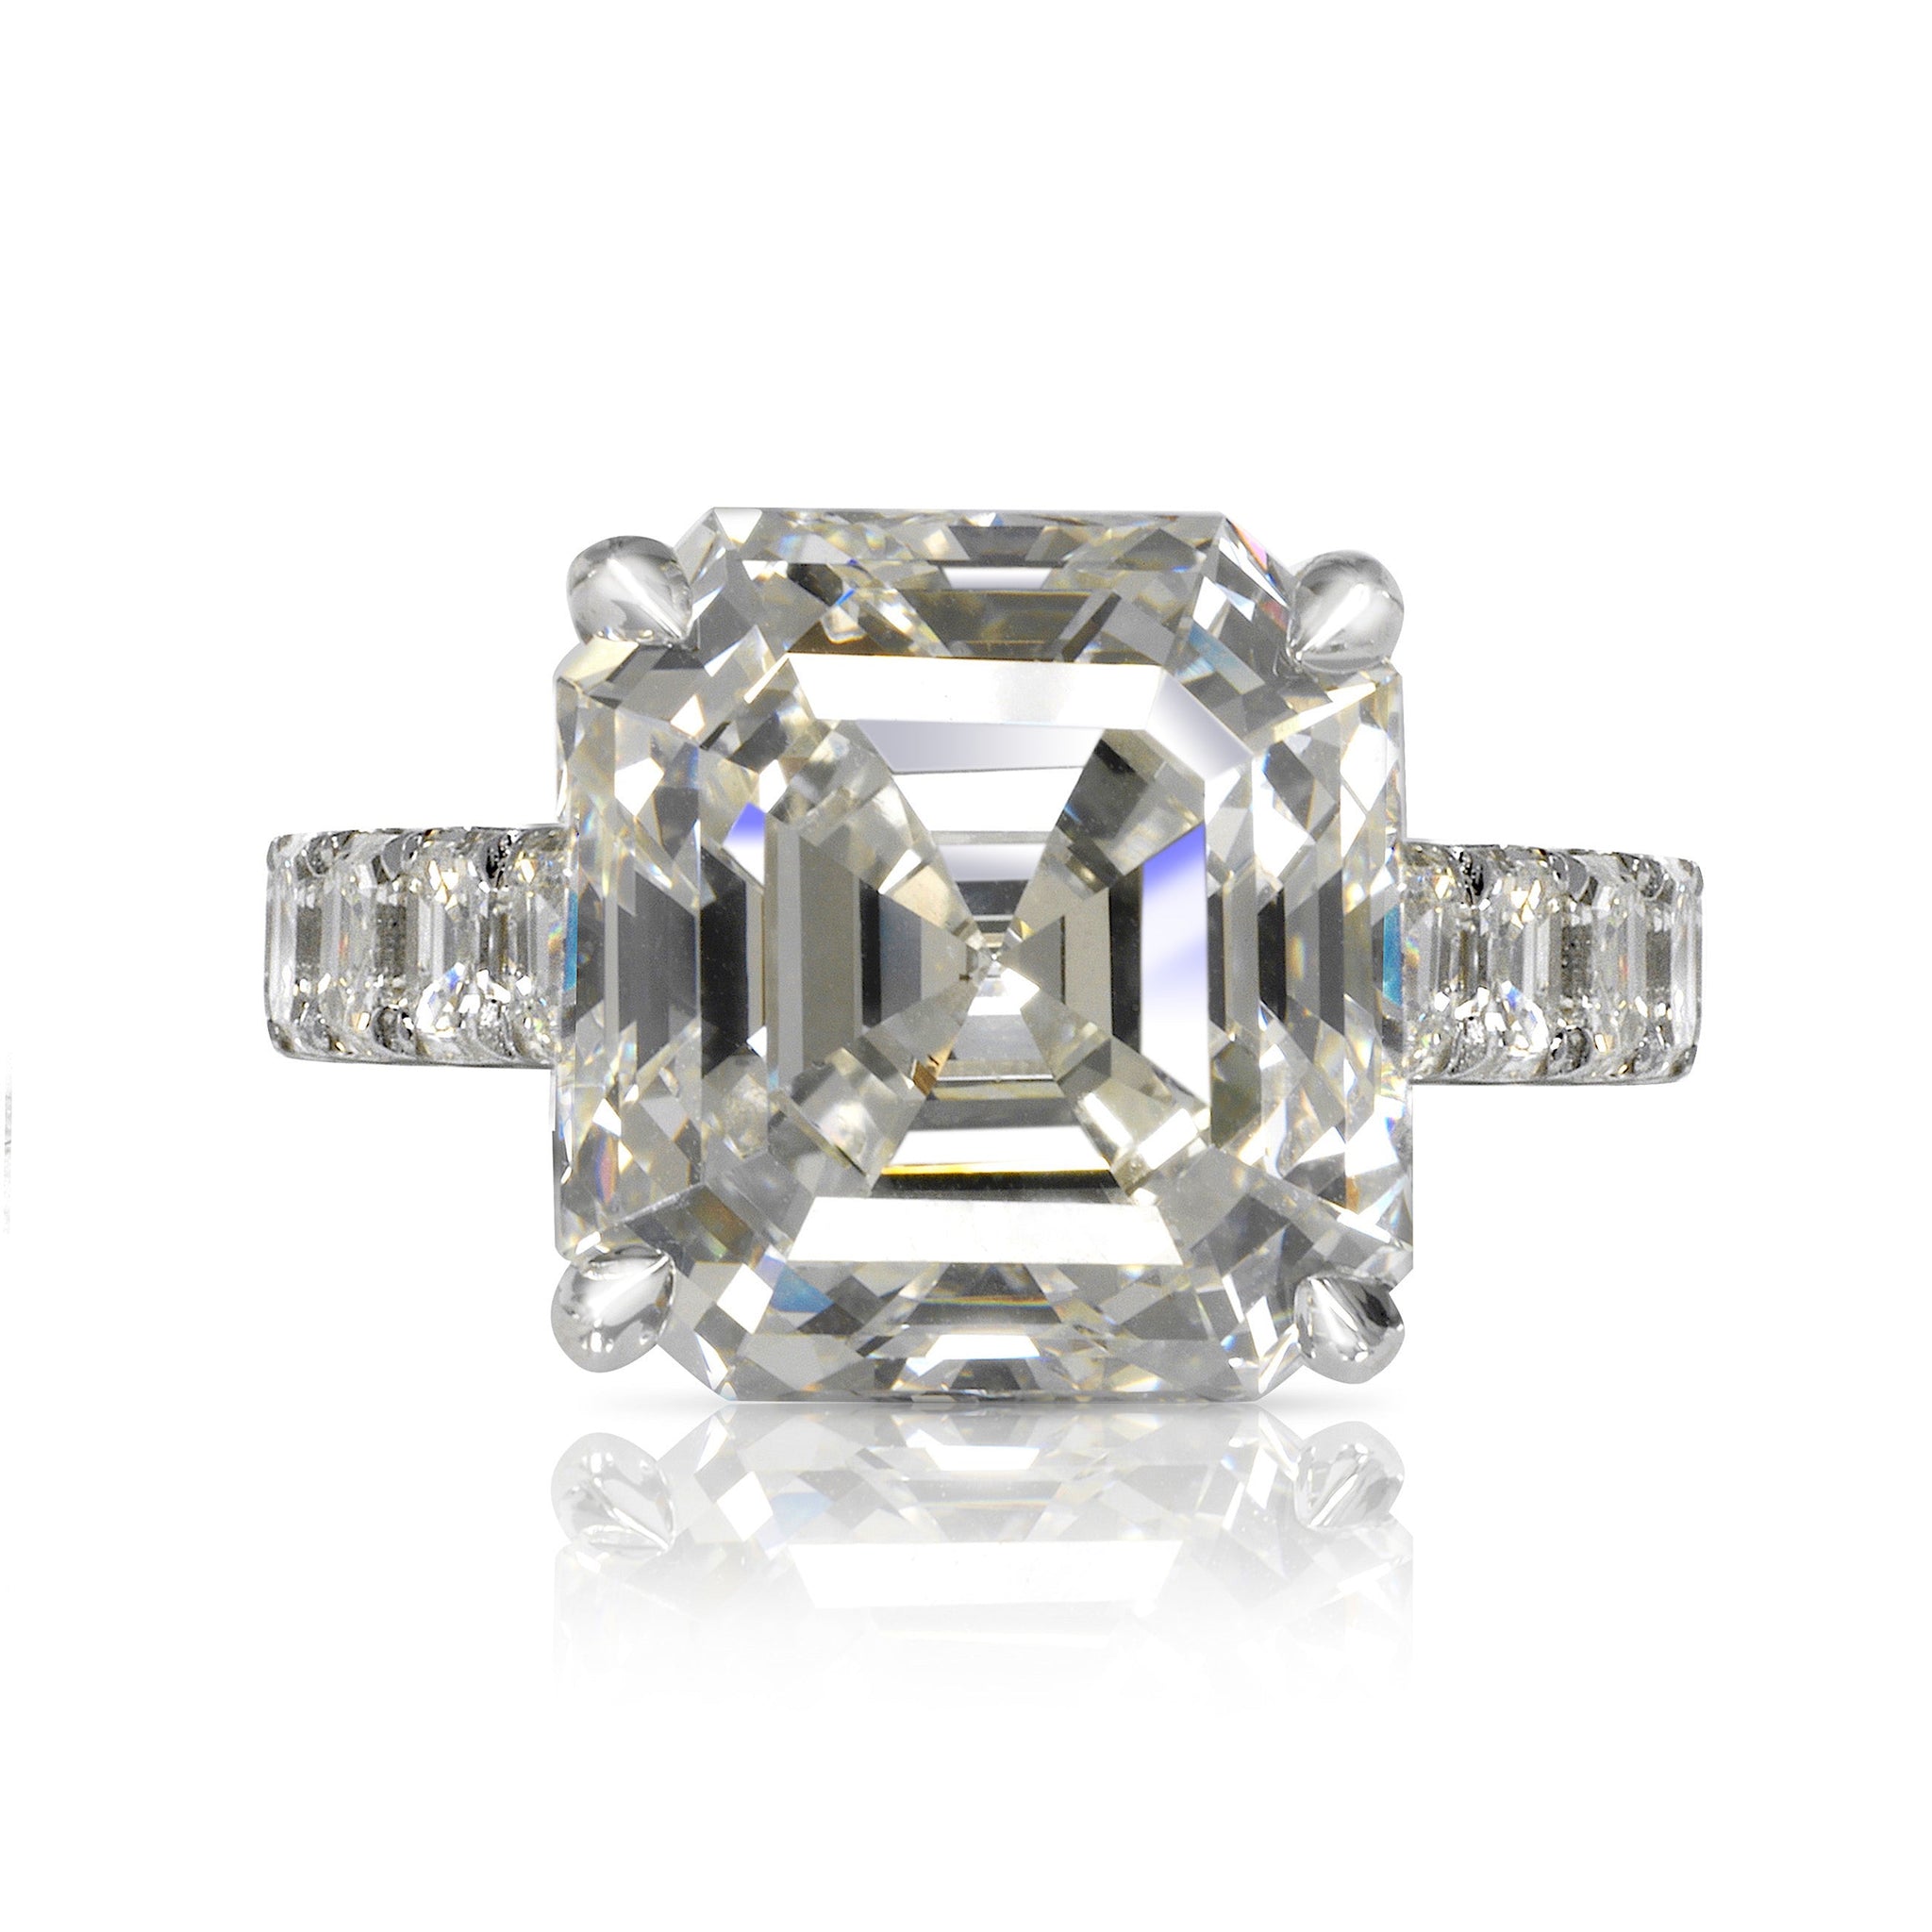 Diamond Ring Asscher Cut 12 Carat Sidestone Ring in 18K White Gold Front View